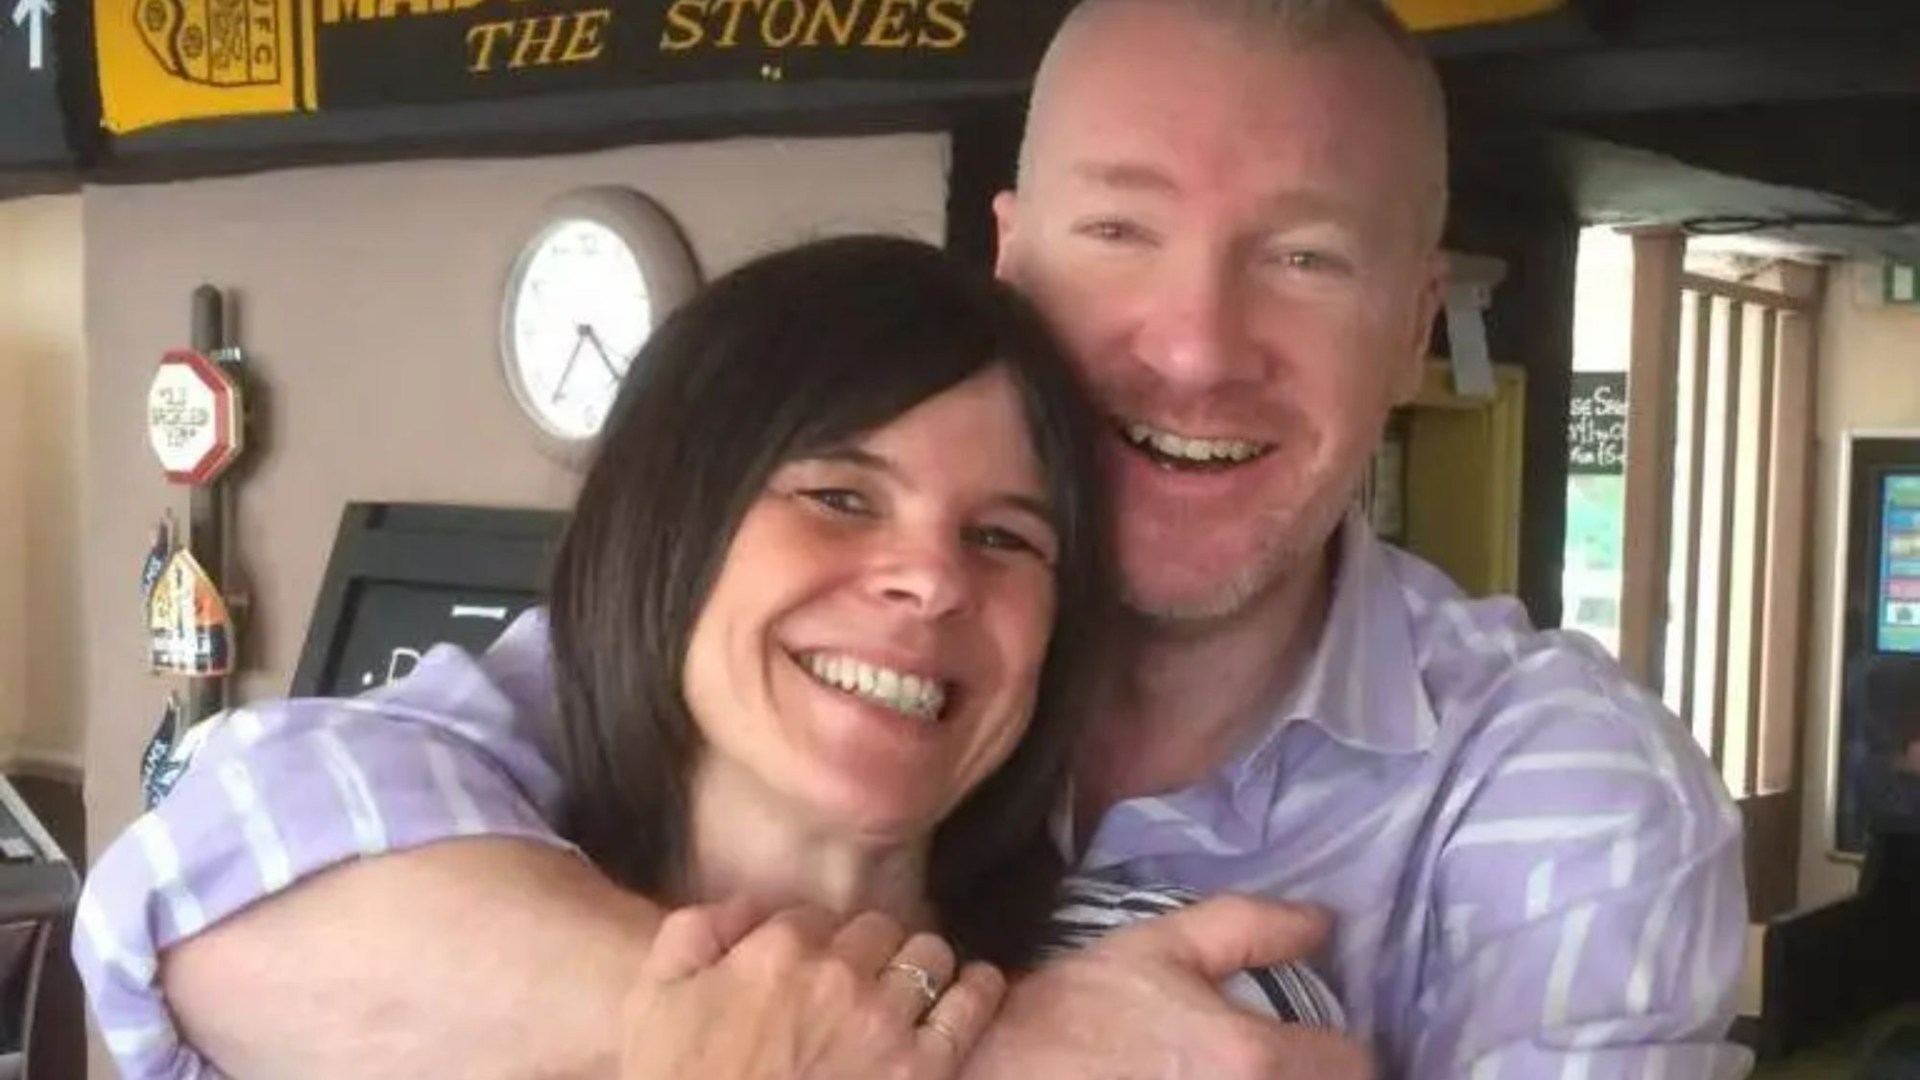 Hero landlord Matthew Bryant knifed to death at own pub night before anniversary trip as wife says ‘my heart’s broken’